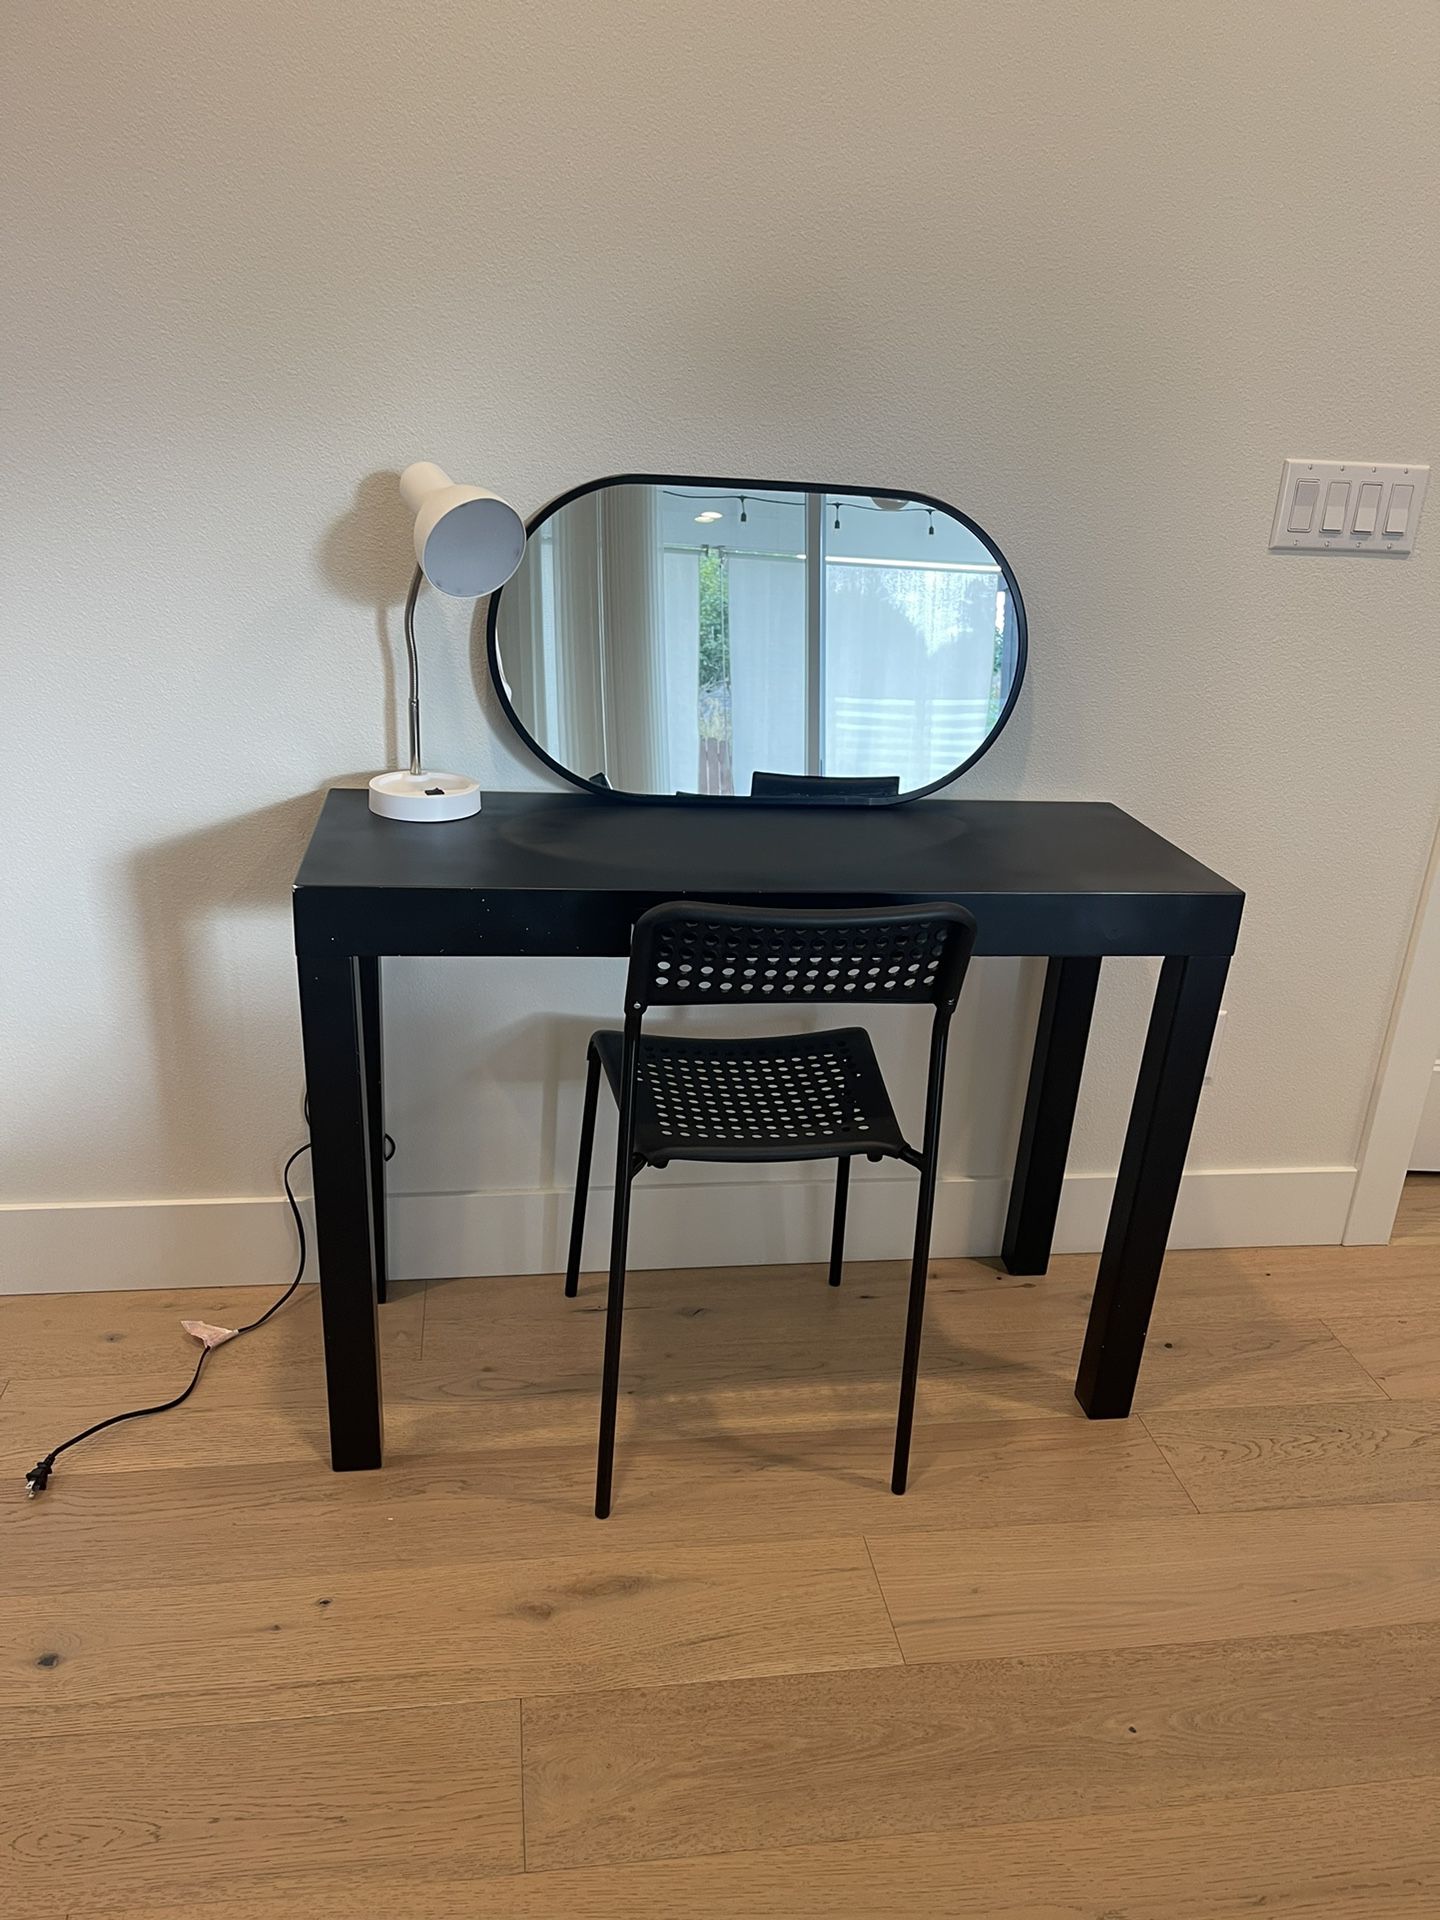 IKEA Desk And Chair,lamp And Mirror 